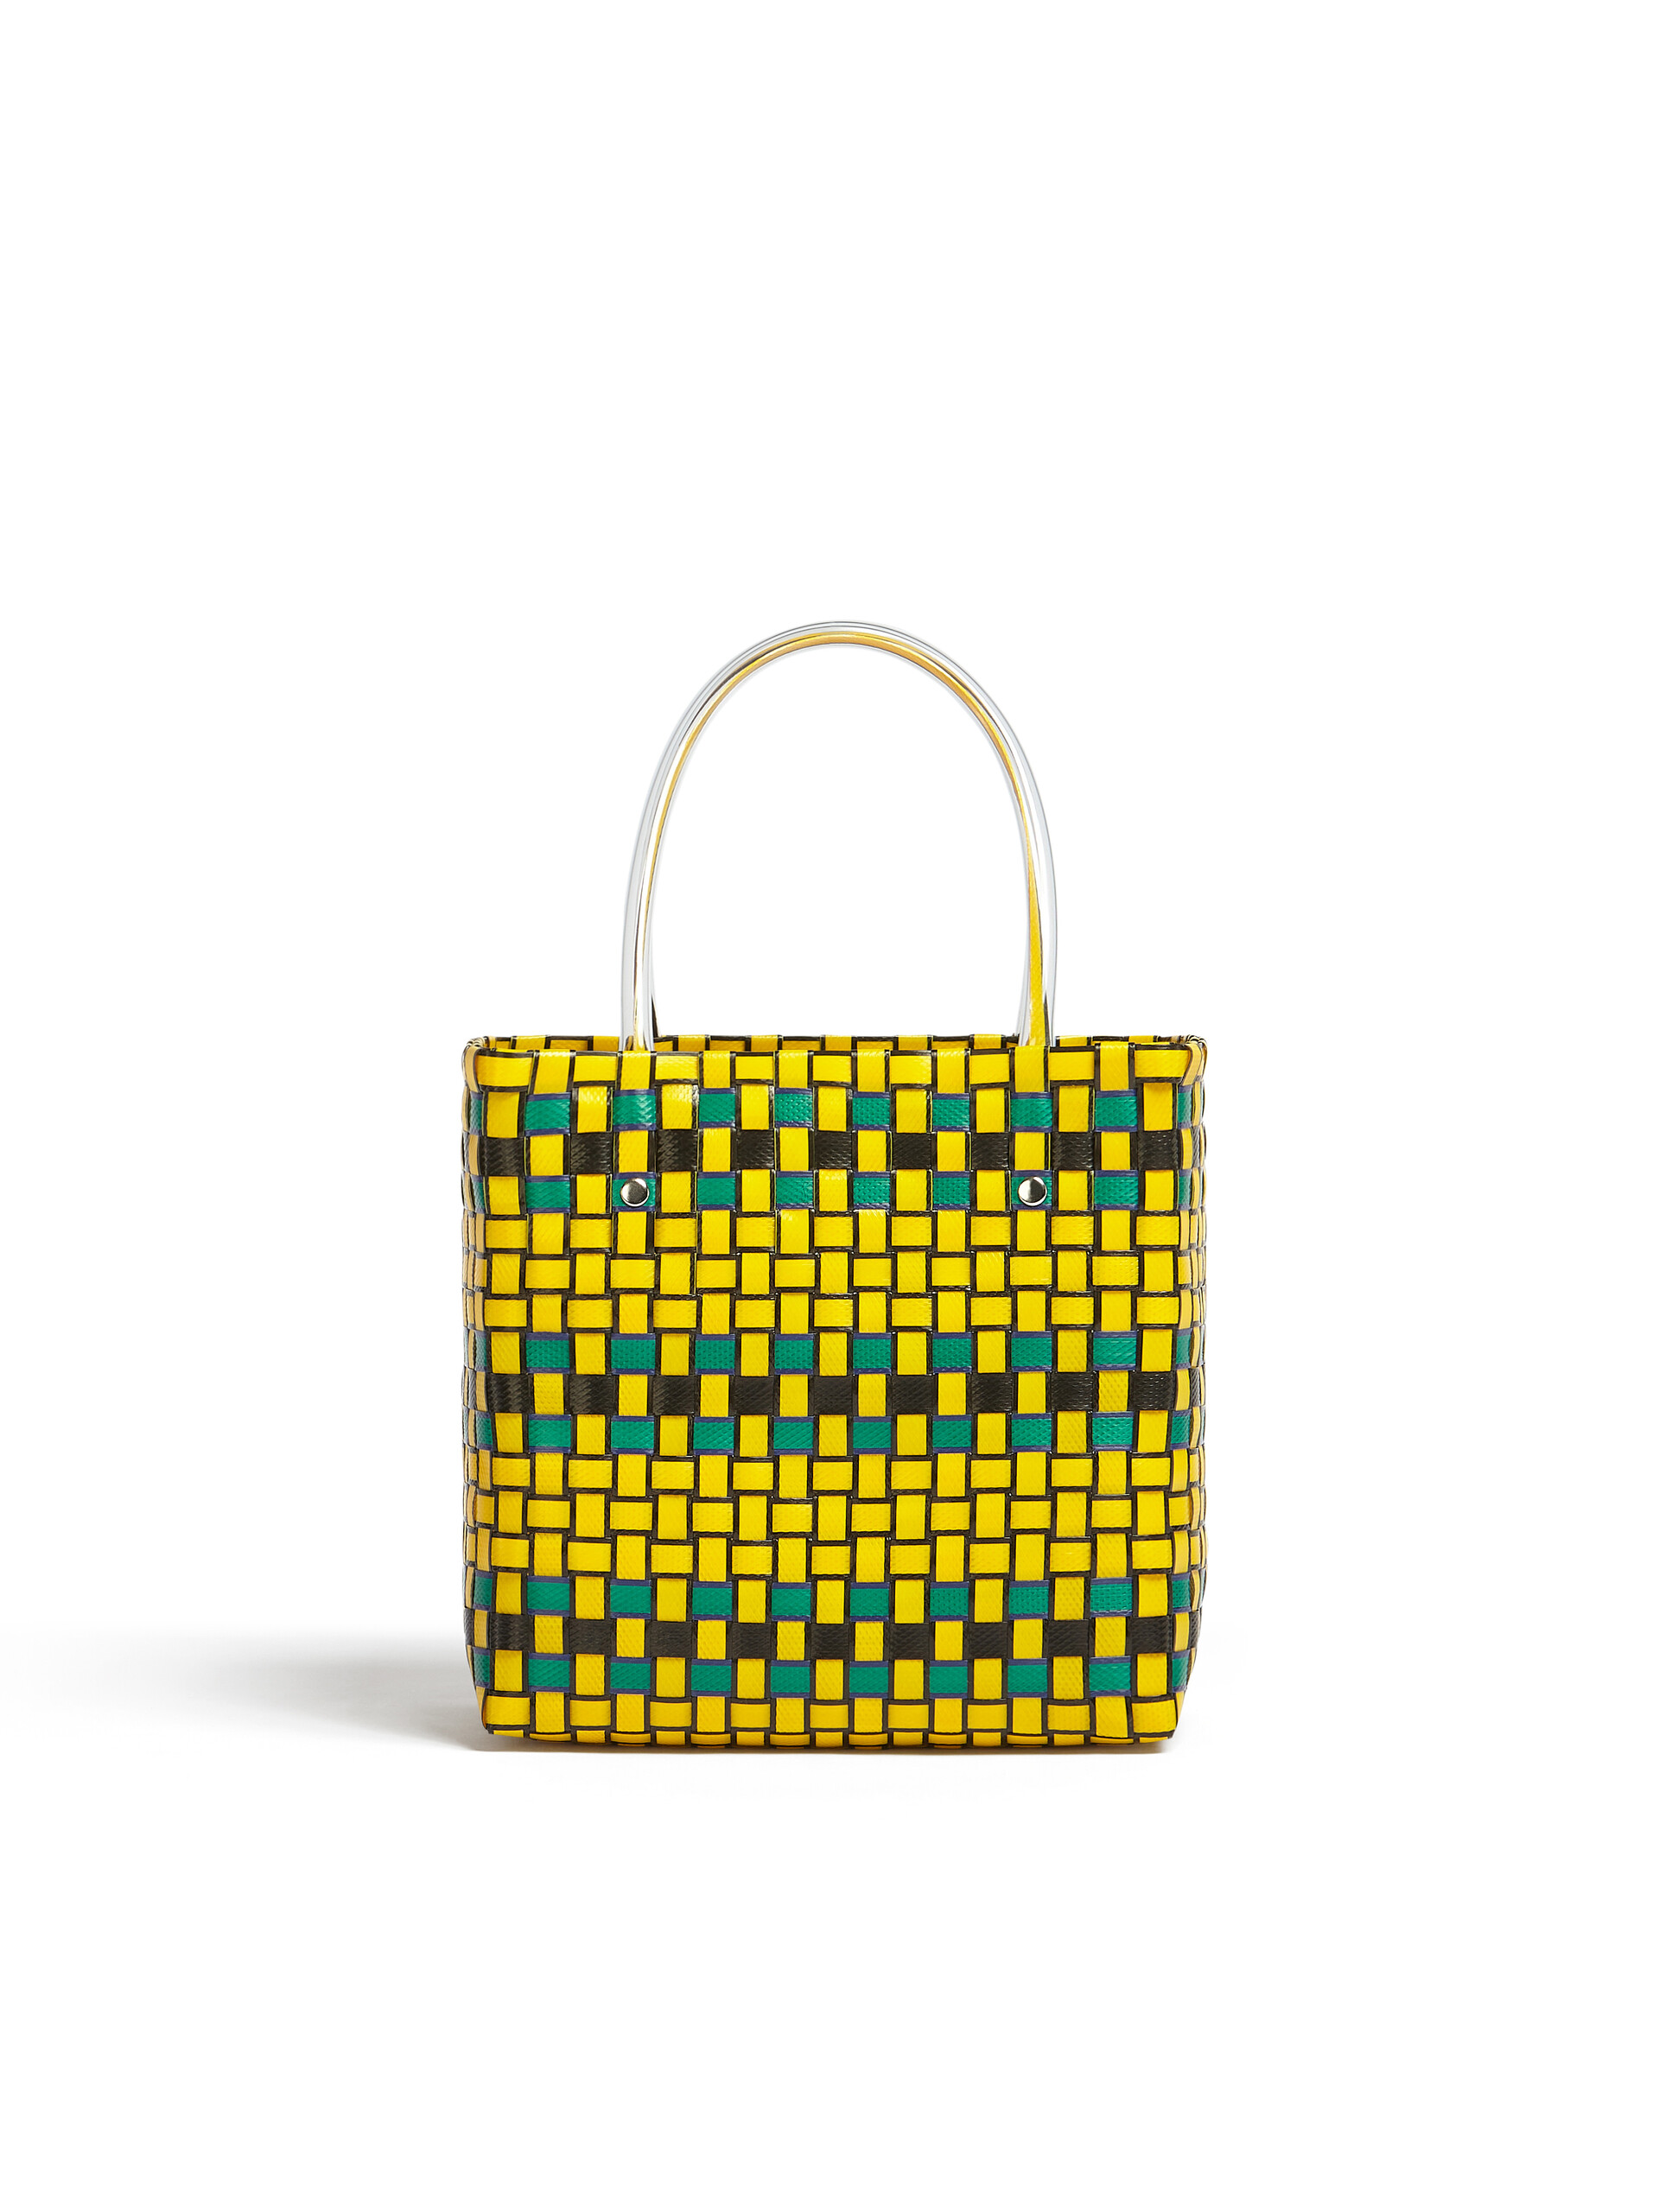 MARNI MARKET BASKET bag in yellow woven material - Shopping Bags - Image 3